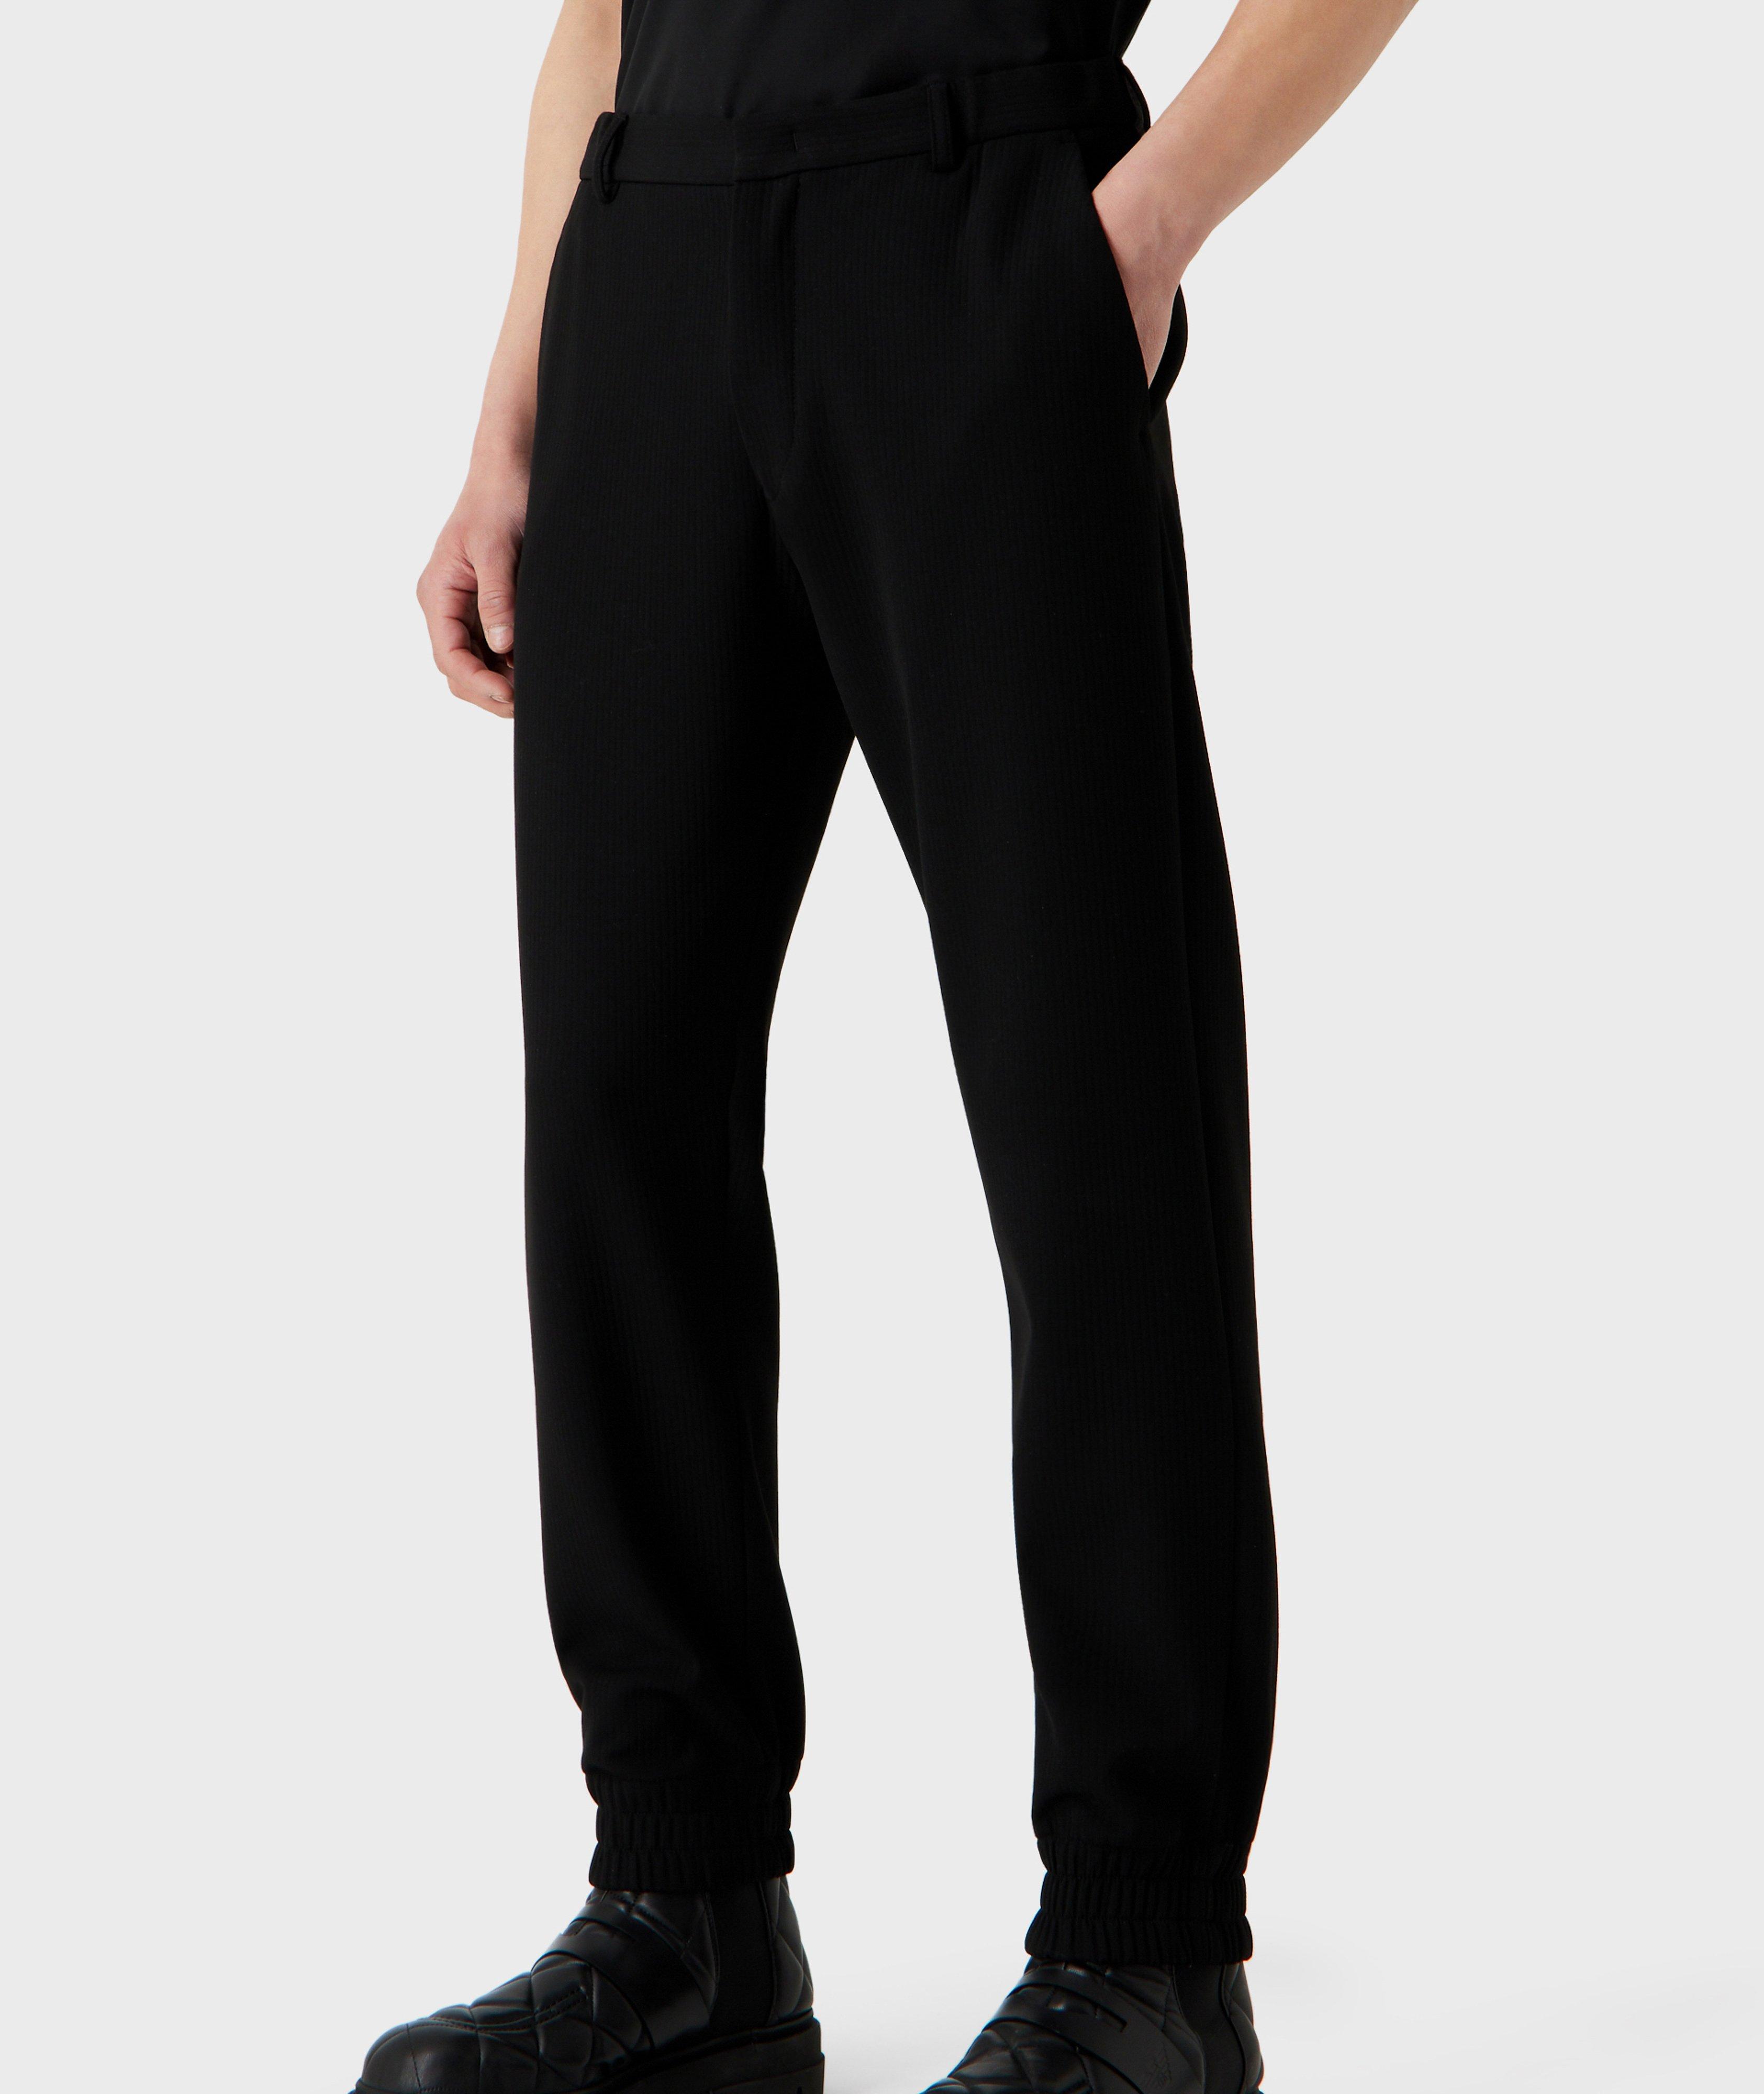 Cannette Technical Fabric Trousers image 1